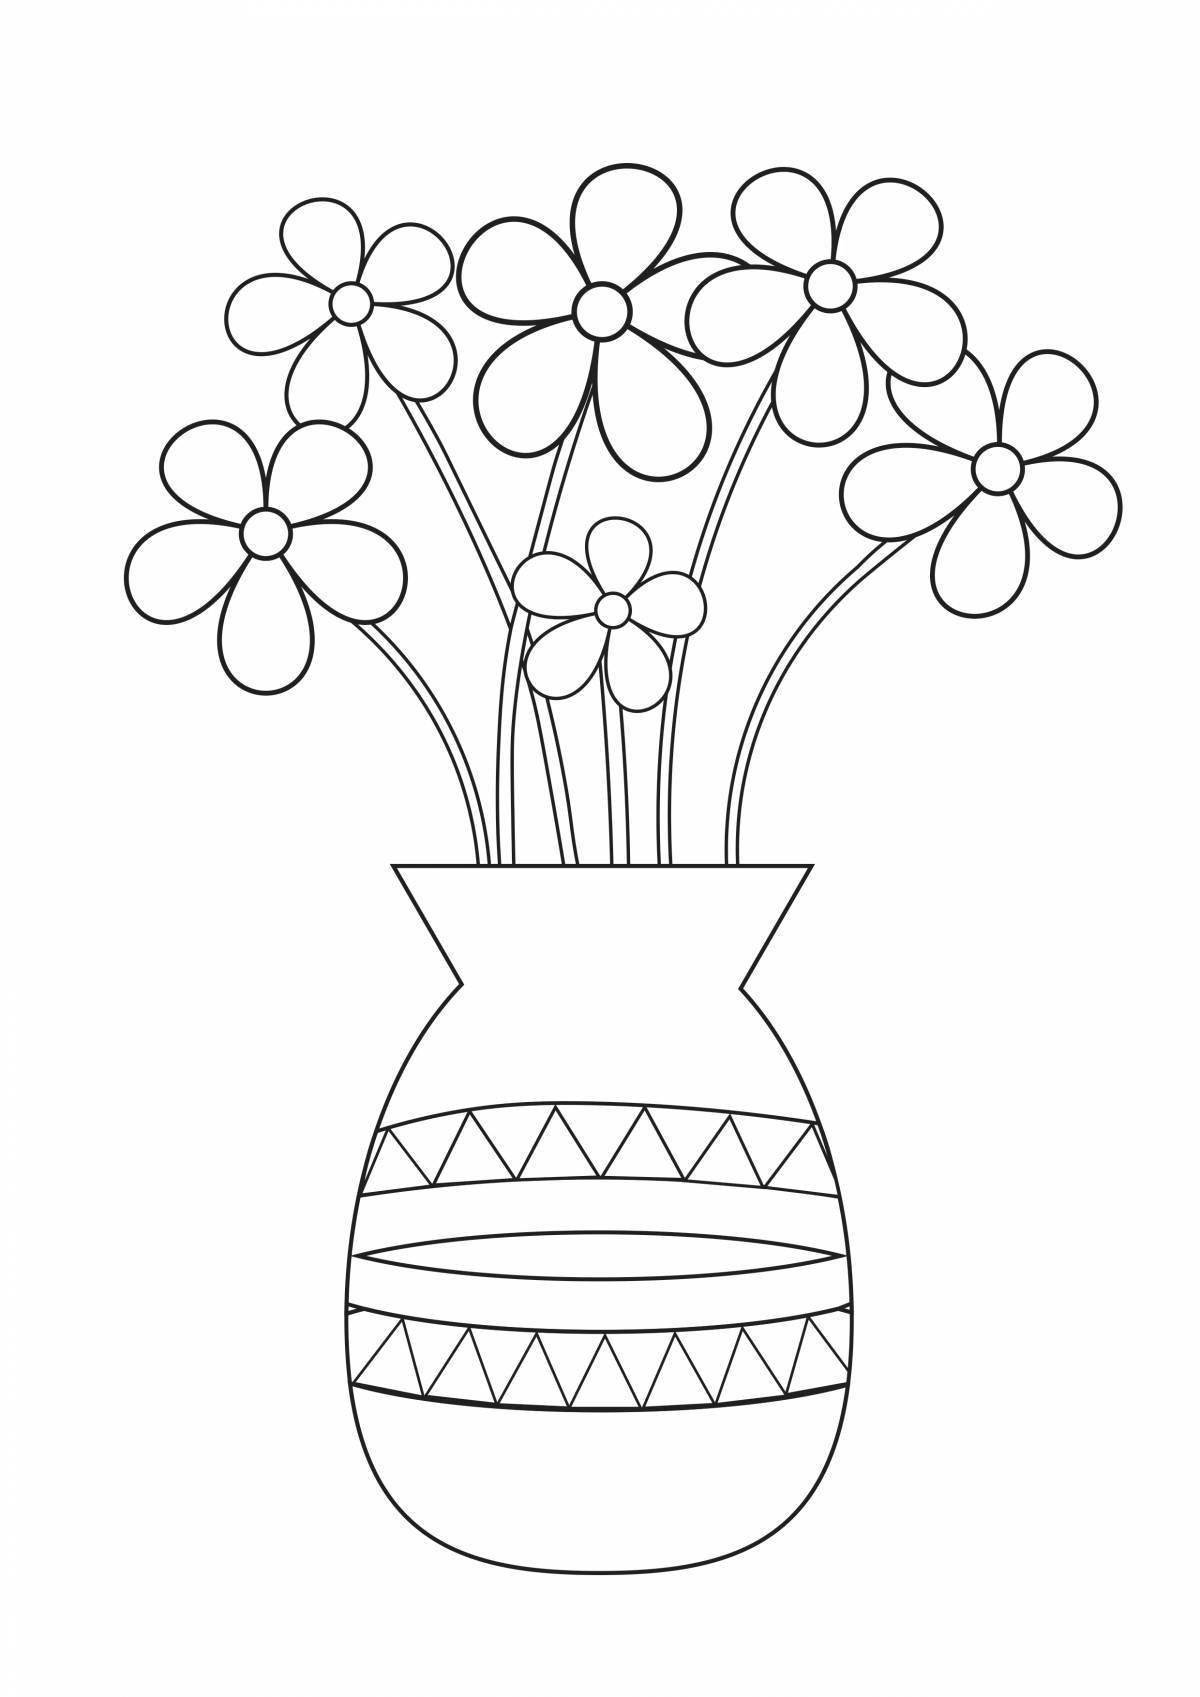 Charming coloring flowers in a vase